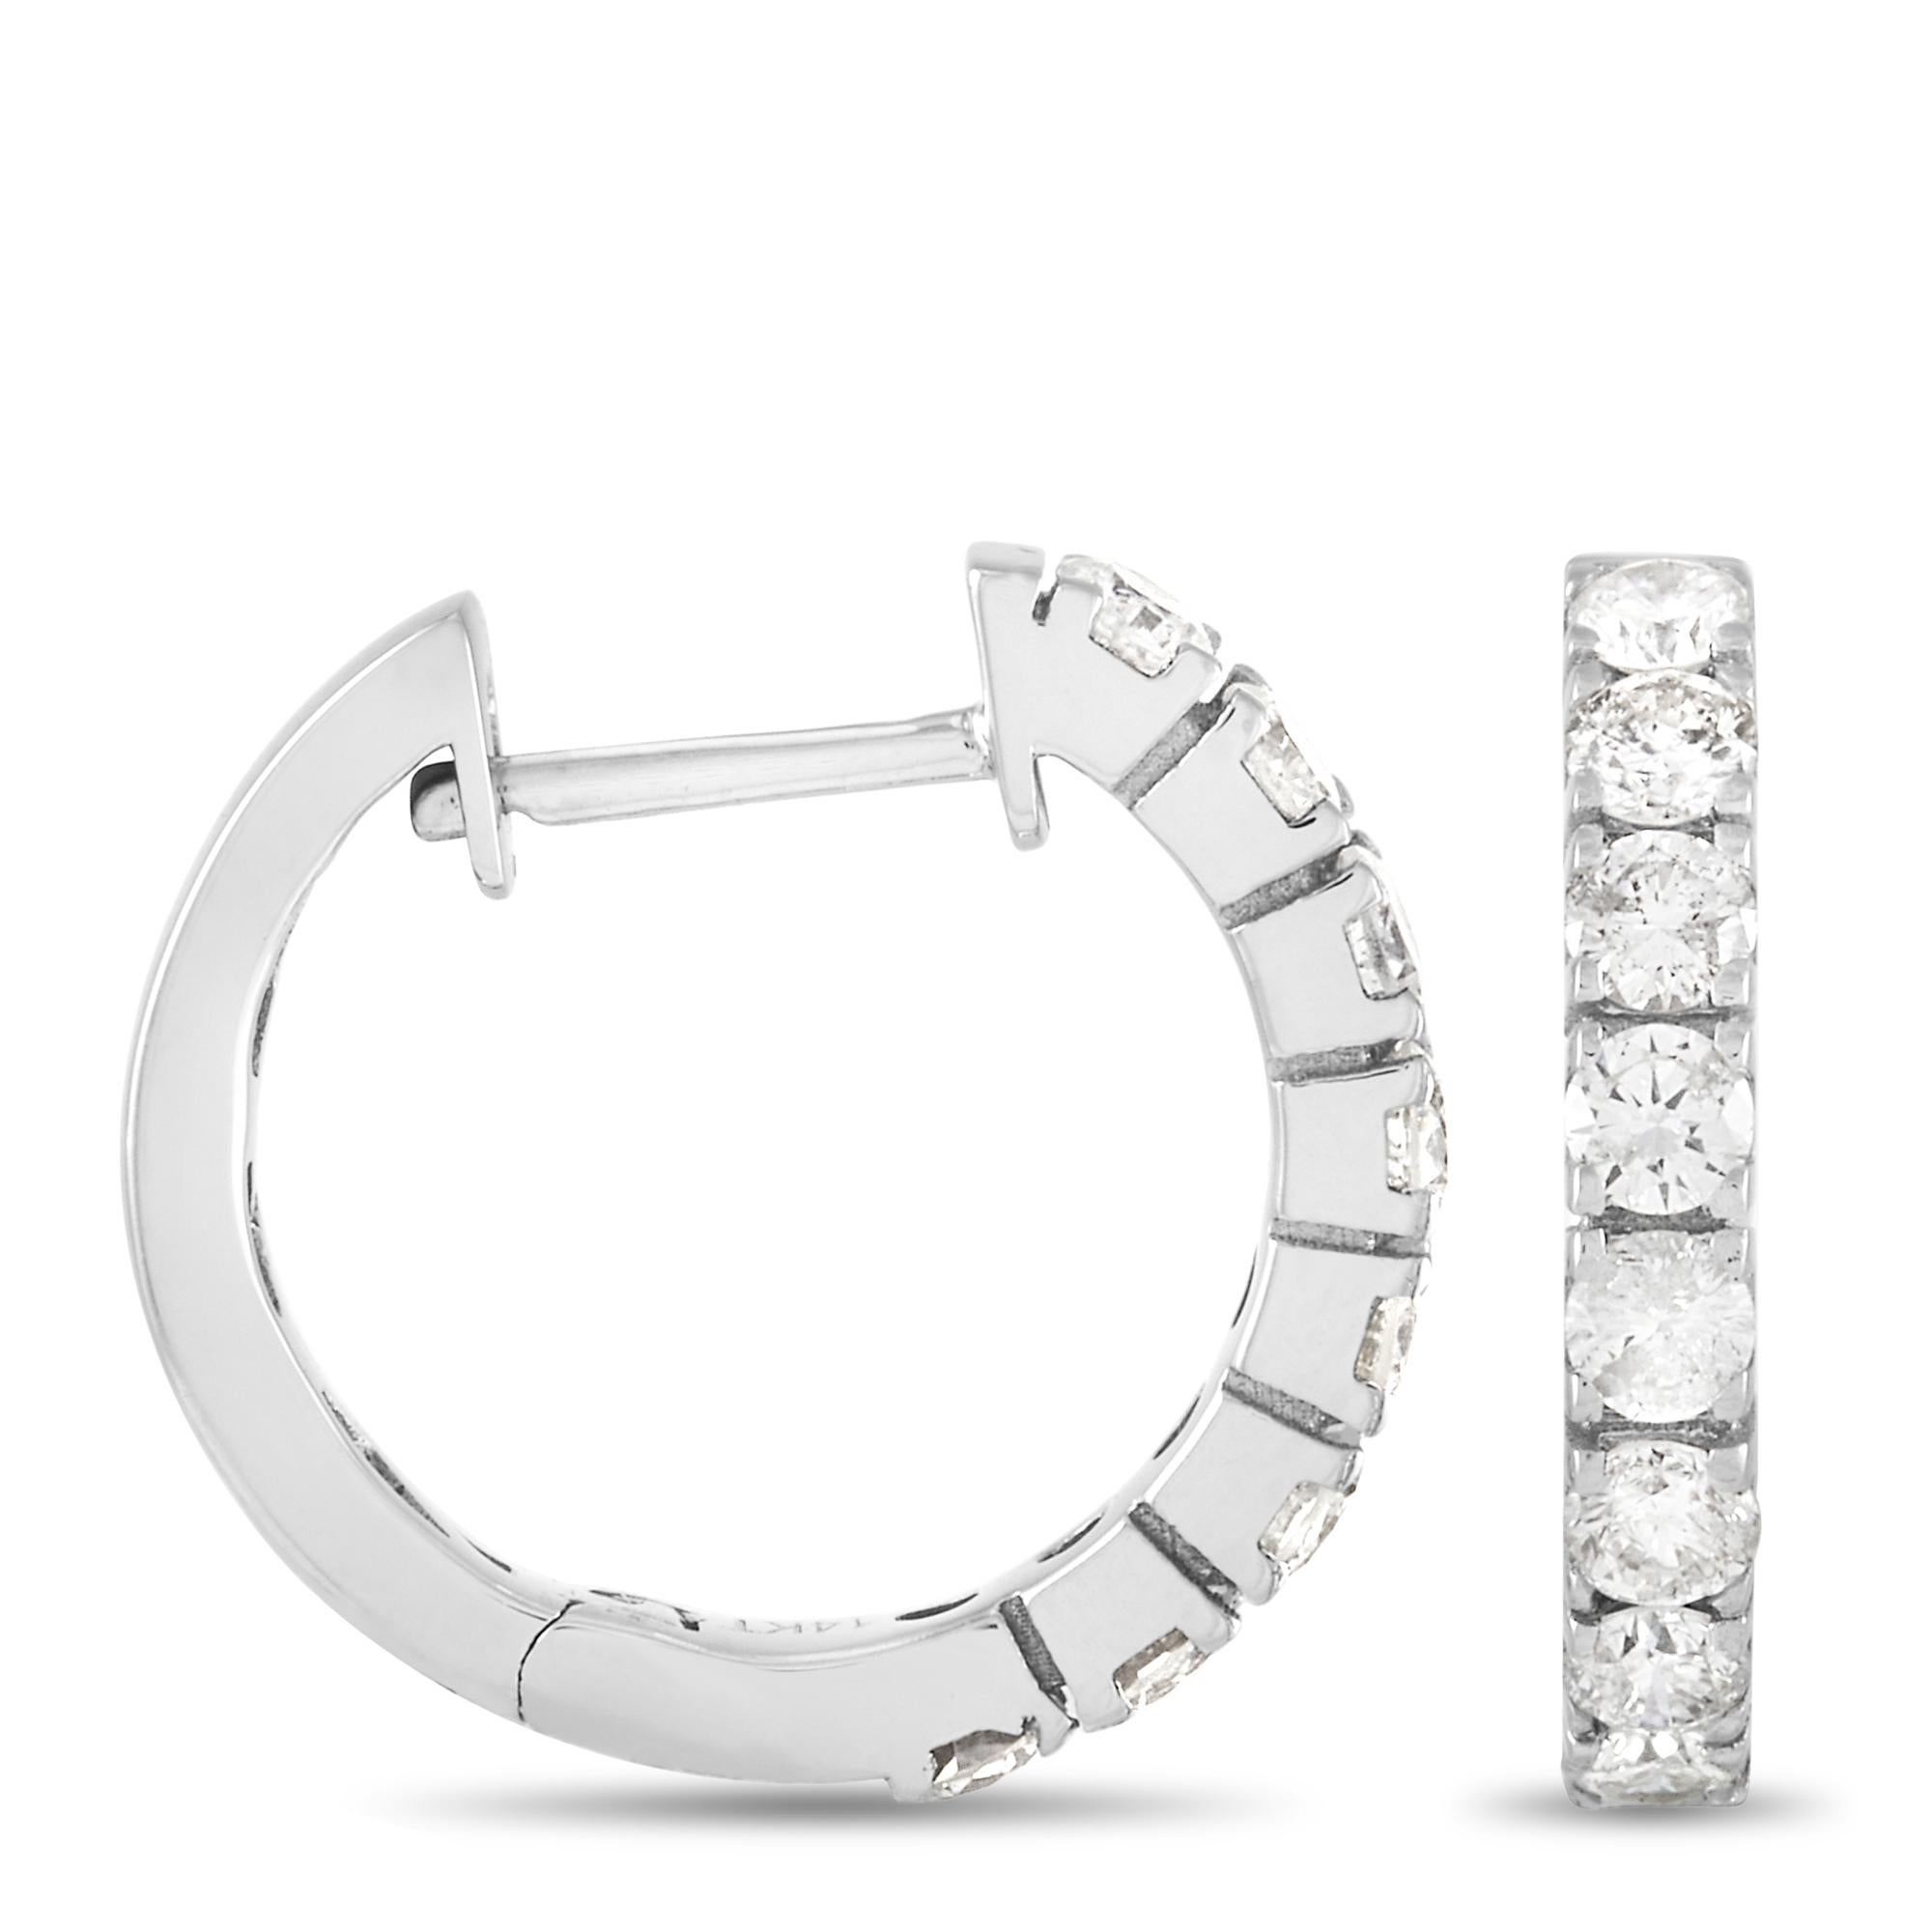 Remarkably crafted from 14K white gold, these attractive earrings are lavishly decorated with 0.83 carats of wonderfully processed diamond stones. The small hoops measure 0.5